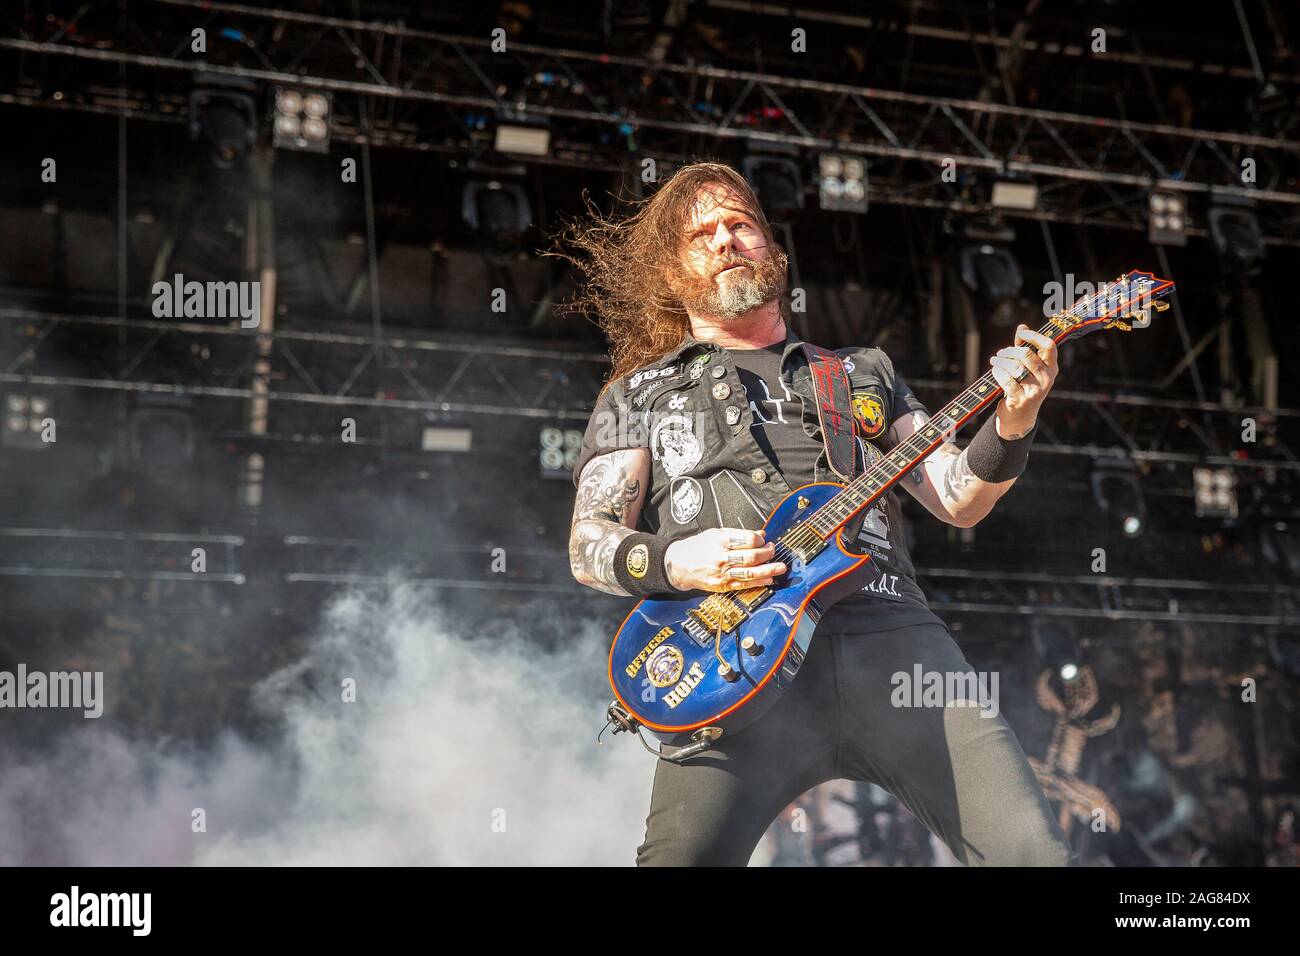 Oslo, Norway. 28th, June 2019. The American thrash metal band Slayer performs a live concert during the Norwegian music festival Tons of Rock 2019. Here guitarist Gary Holt is seen live on stage. (Photo credit: Gonzales Photo - Terje Dokken). Stock Photo